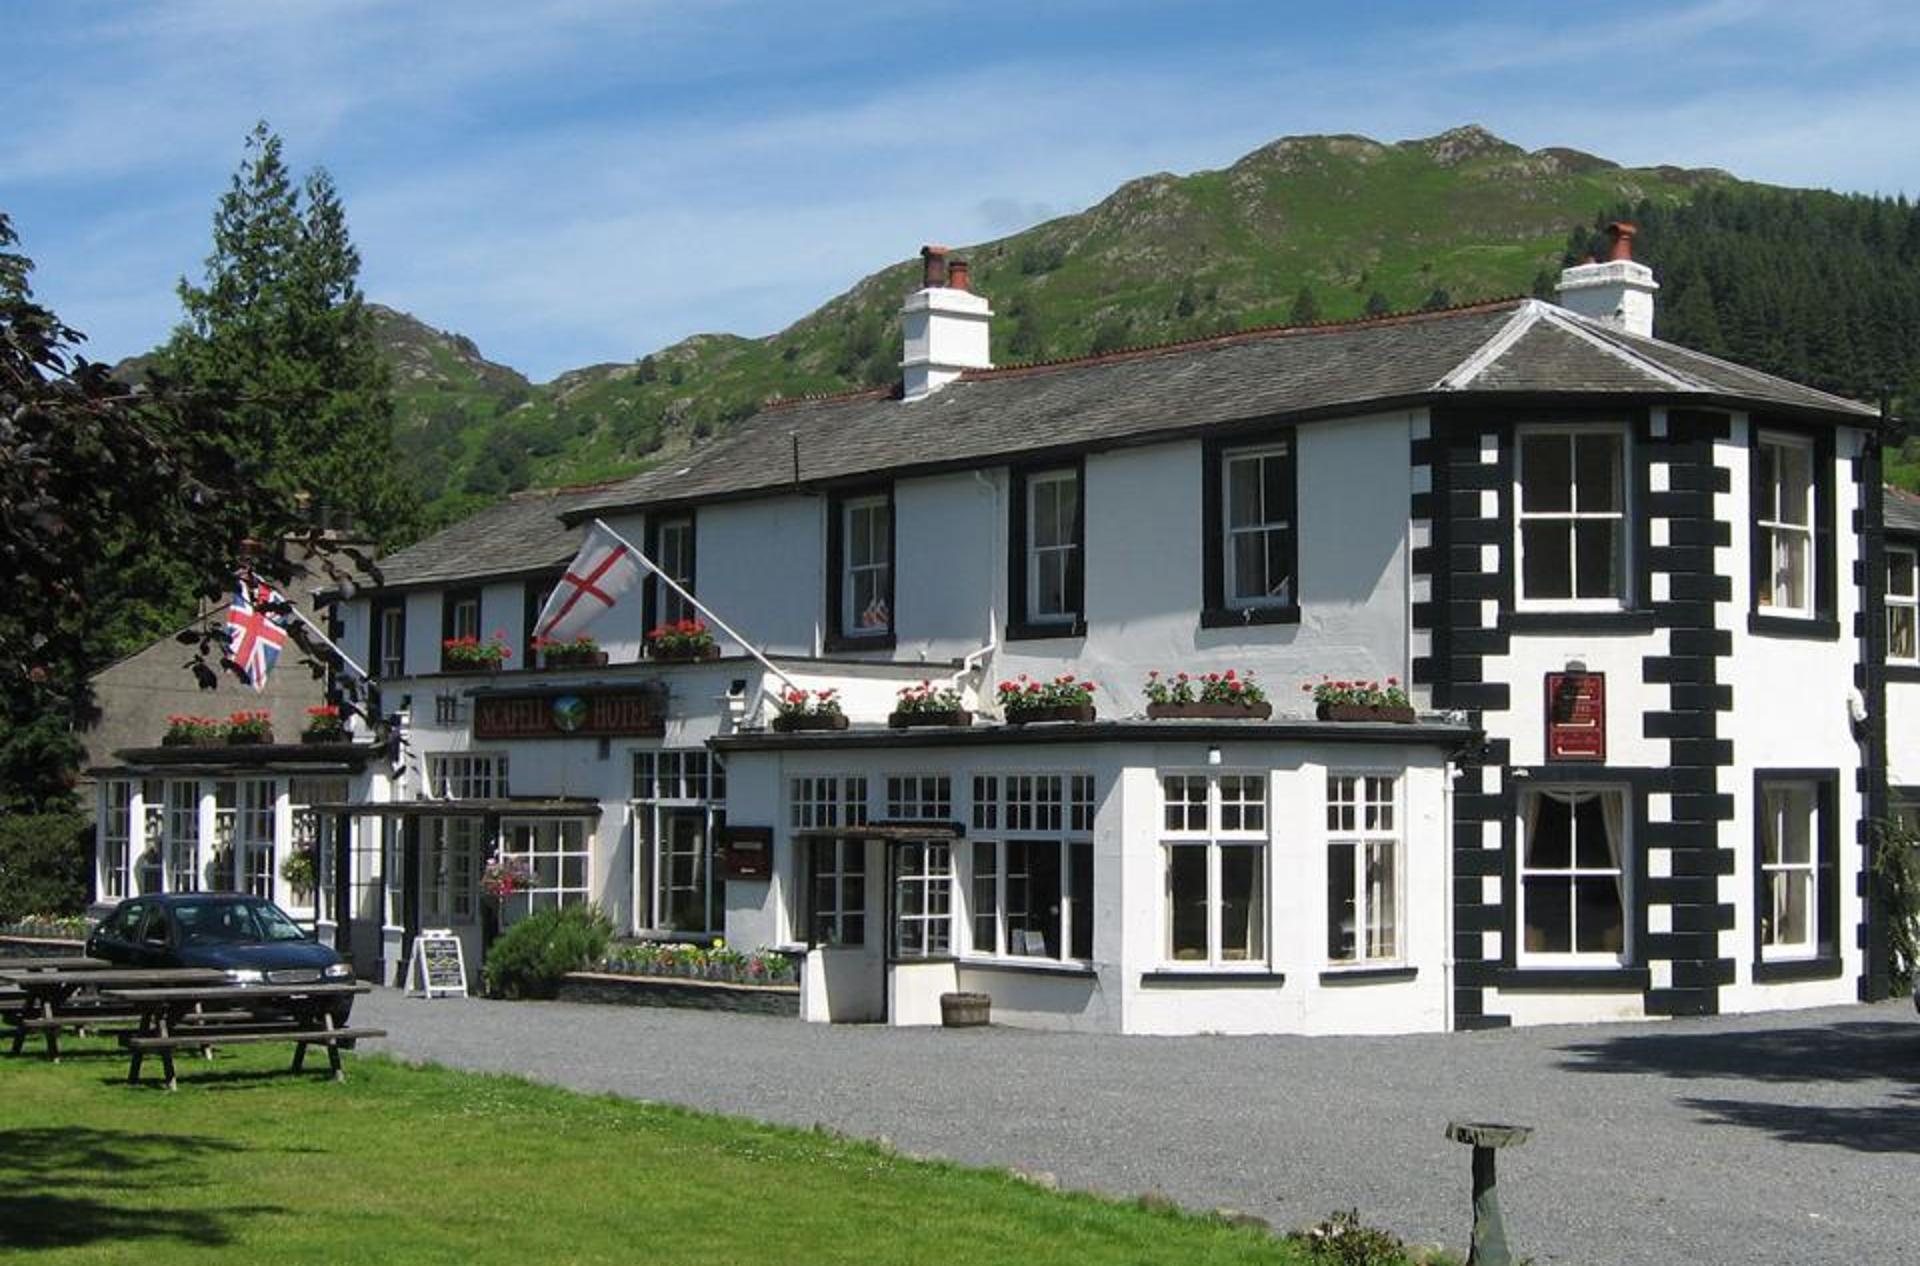 Lake District hotel and inn on the market for £2.75m